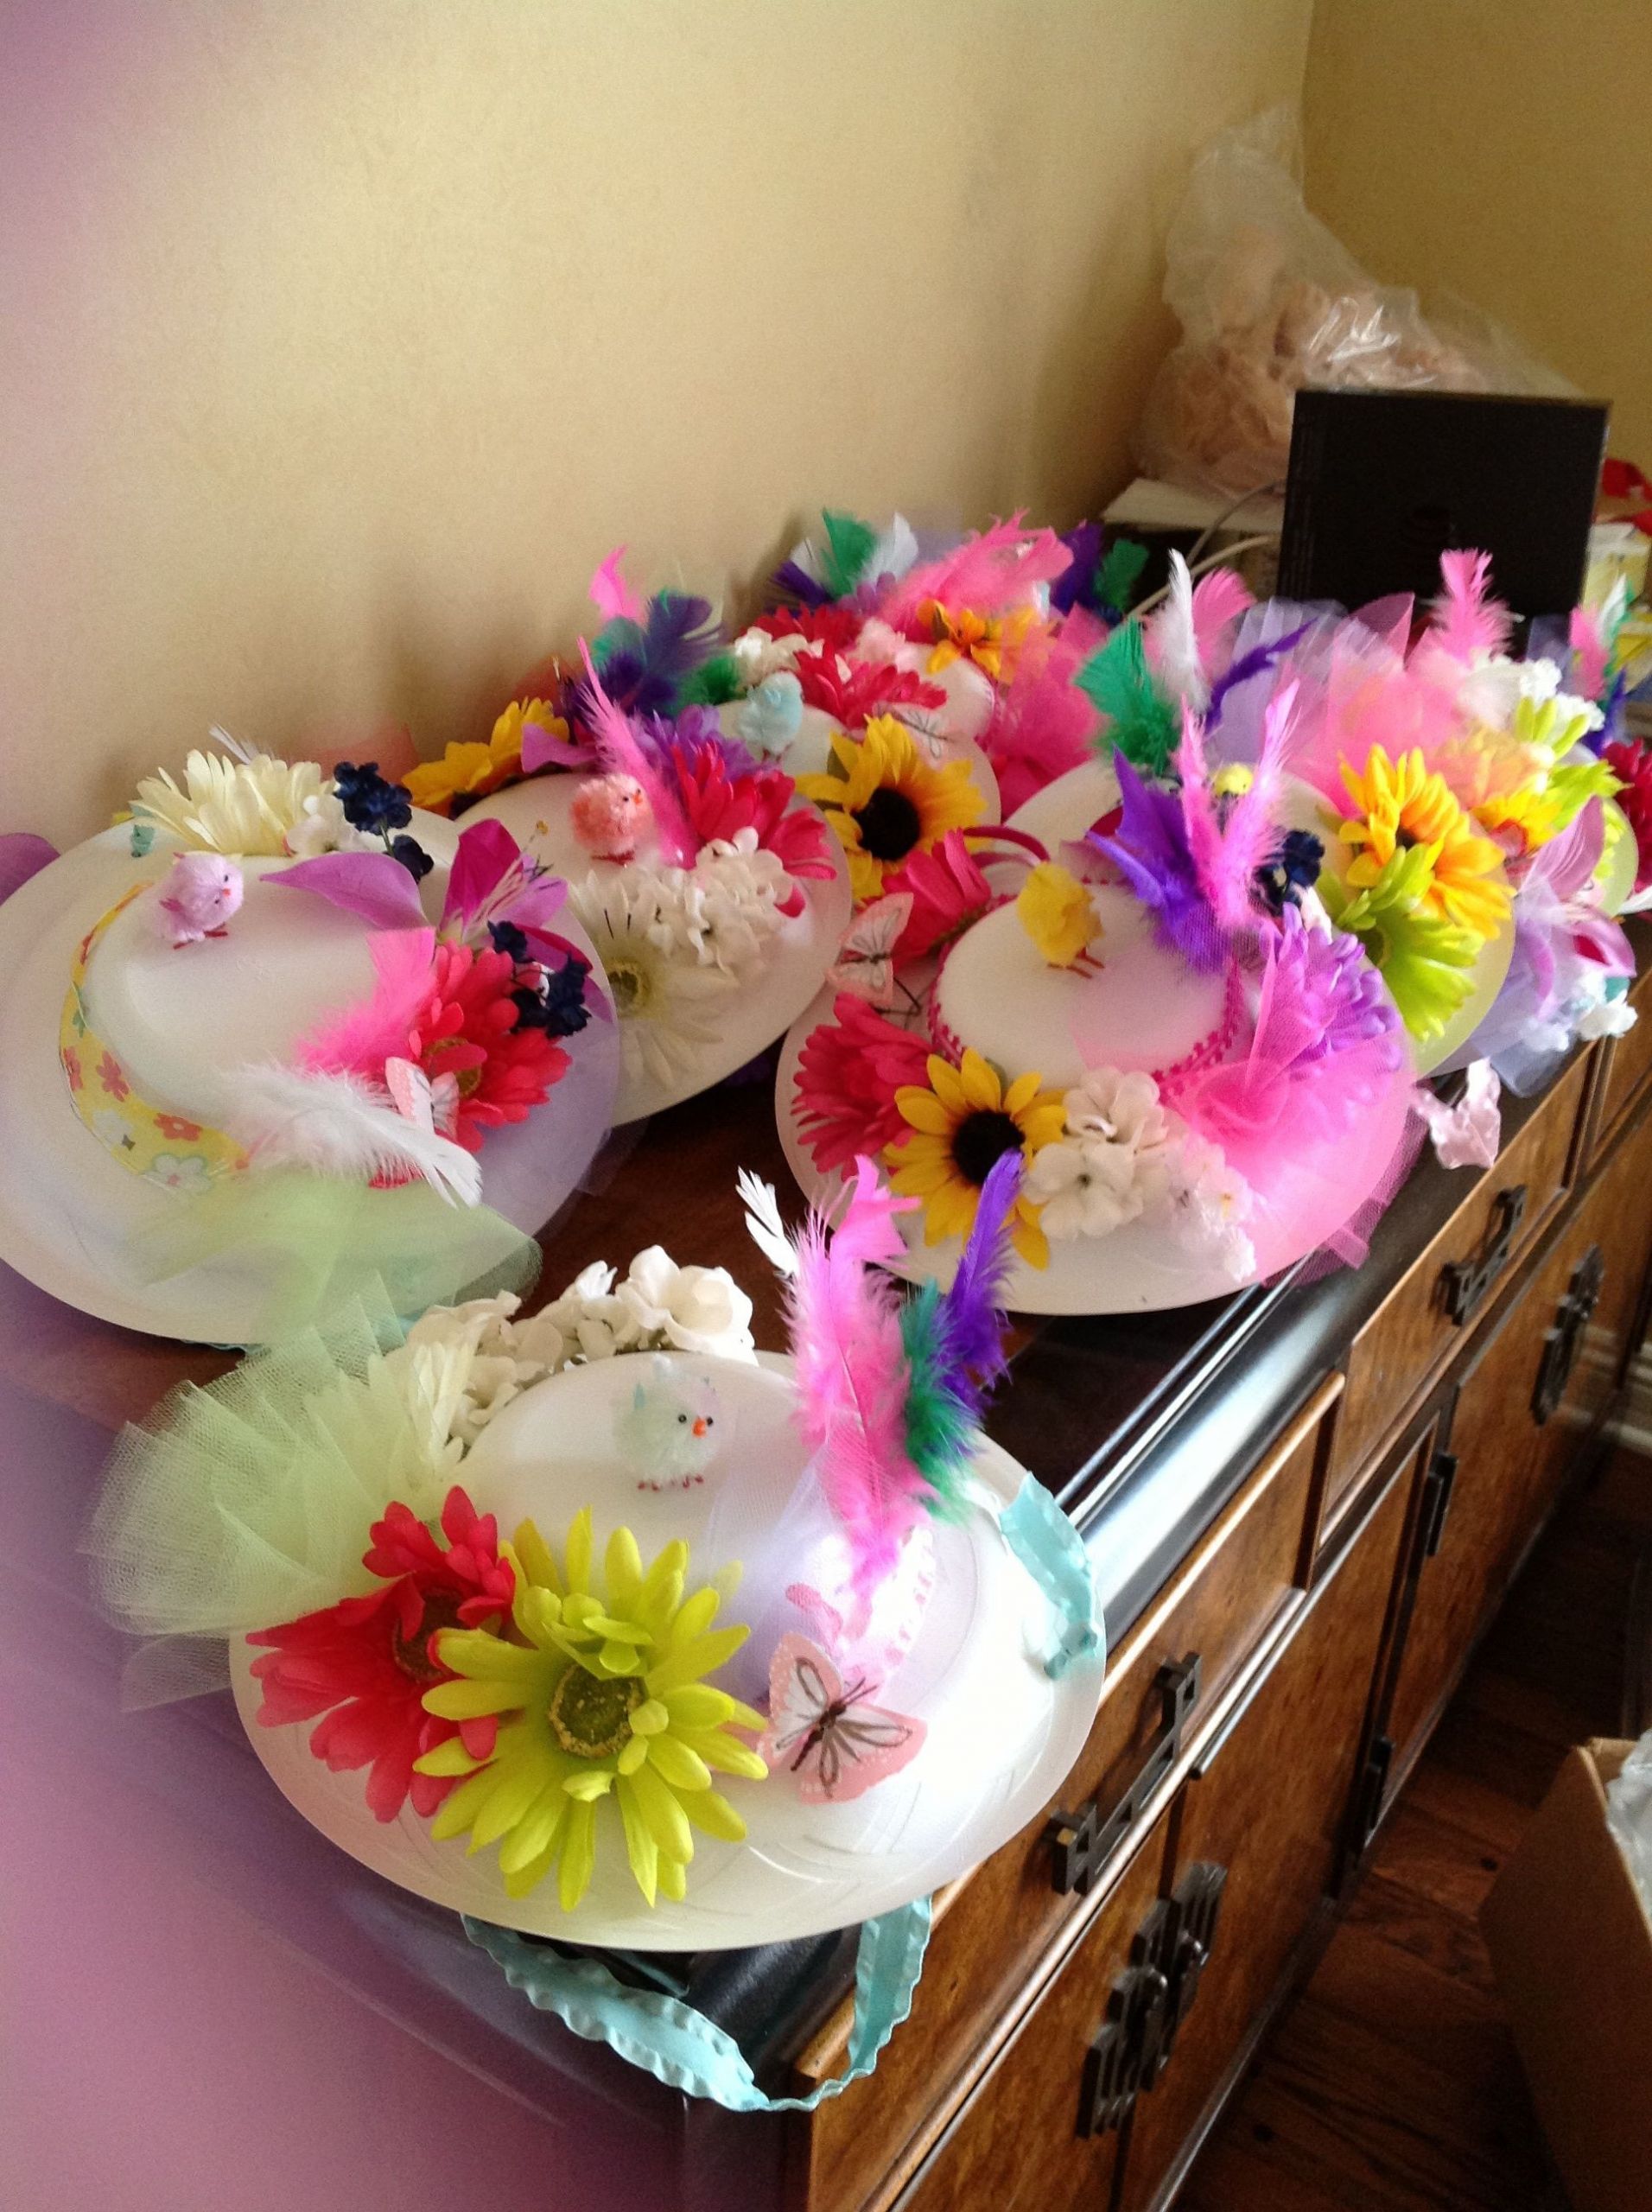 Tea Party Hats For Kids
 I had my troop make tea party hats from Dixie plates for a